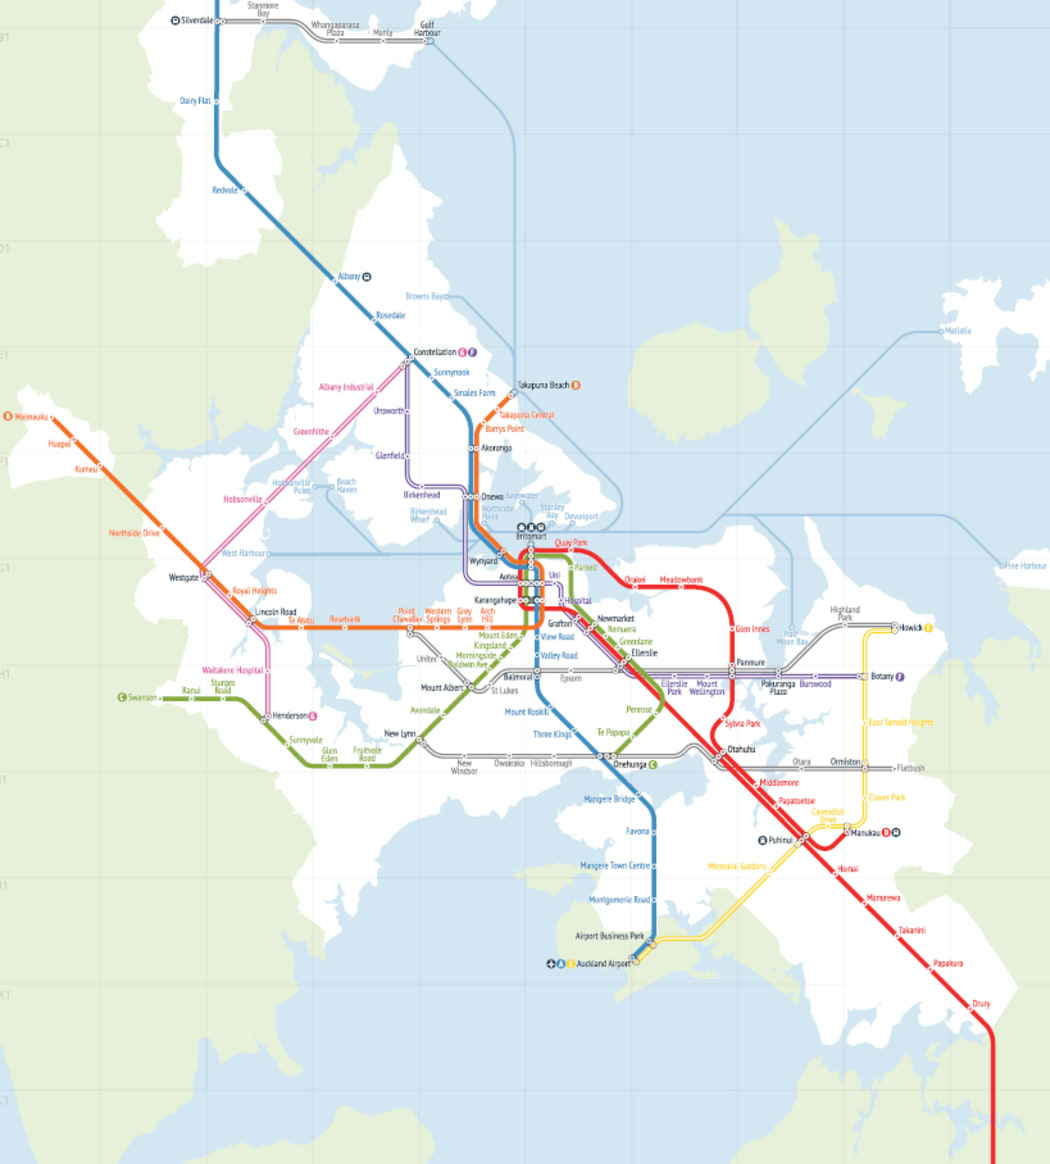 Greater Auckland proposes a network of rapid transit routes extending further north and north-west than presently planned